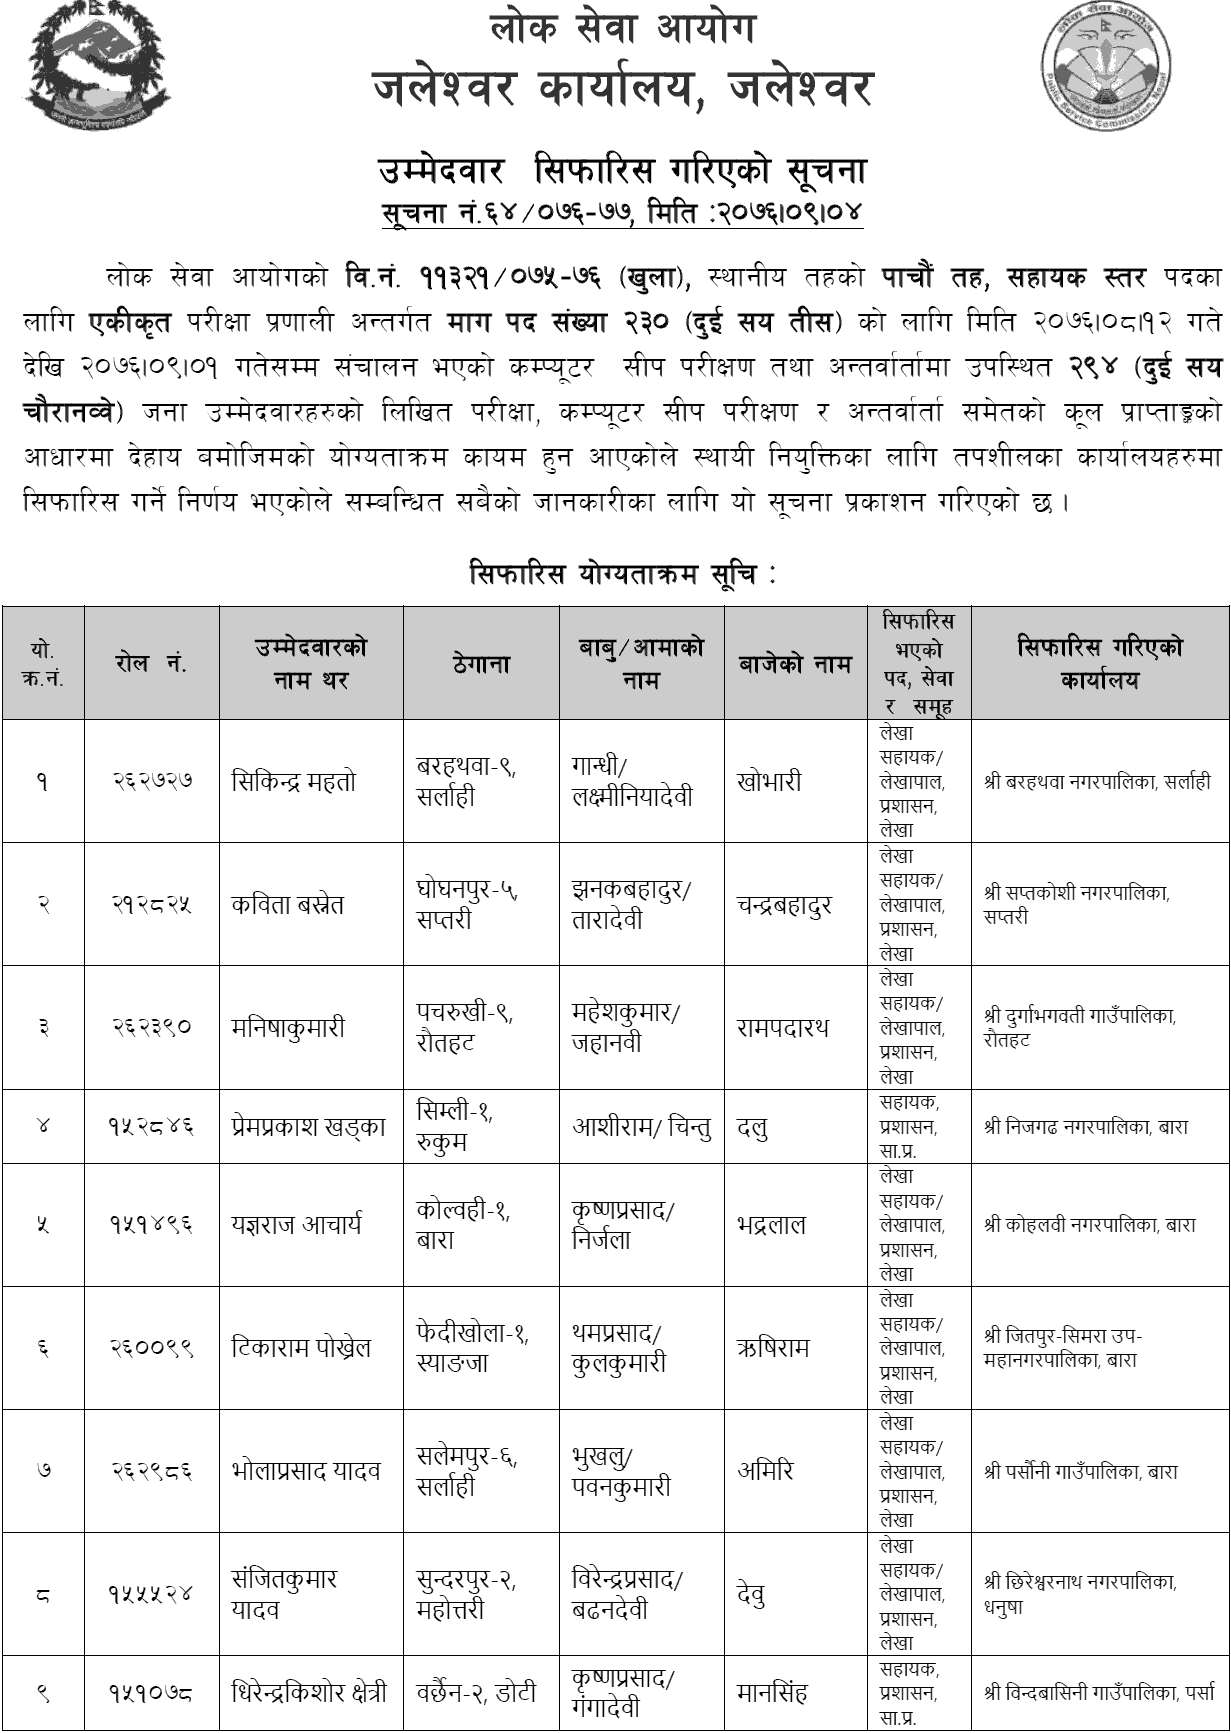 Lok Sewa Aayog Jaleshwor Local Level 5th Assistant Final Result and Appointment